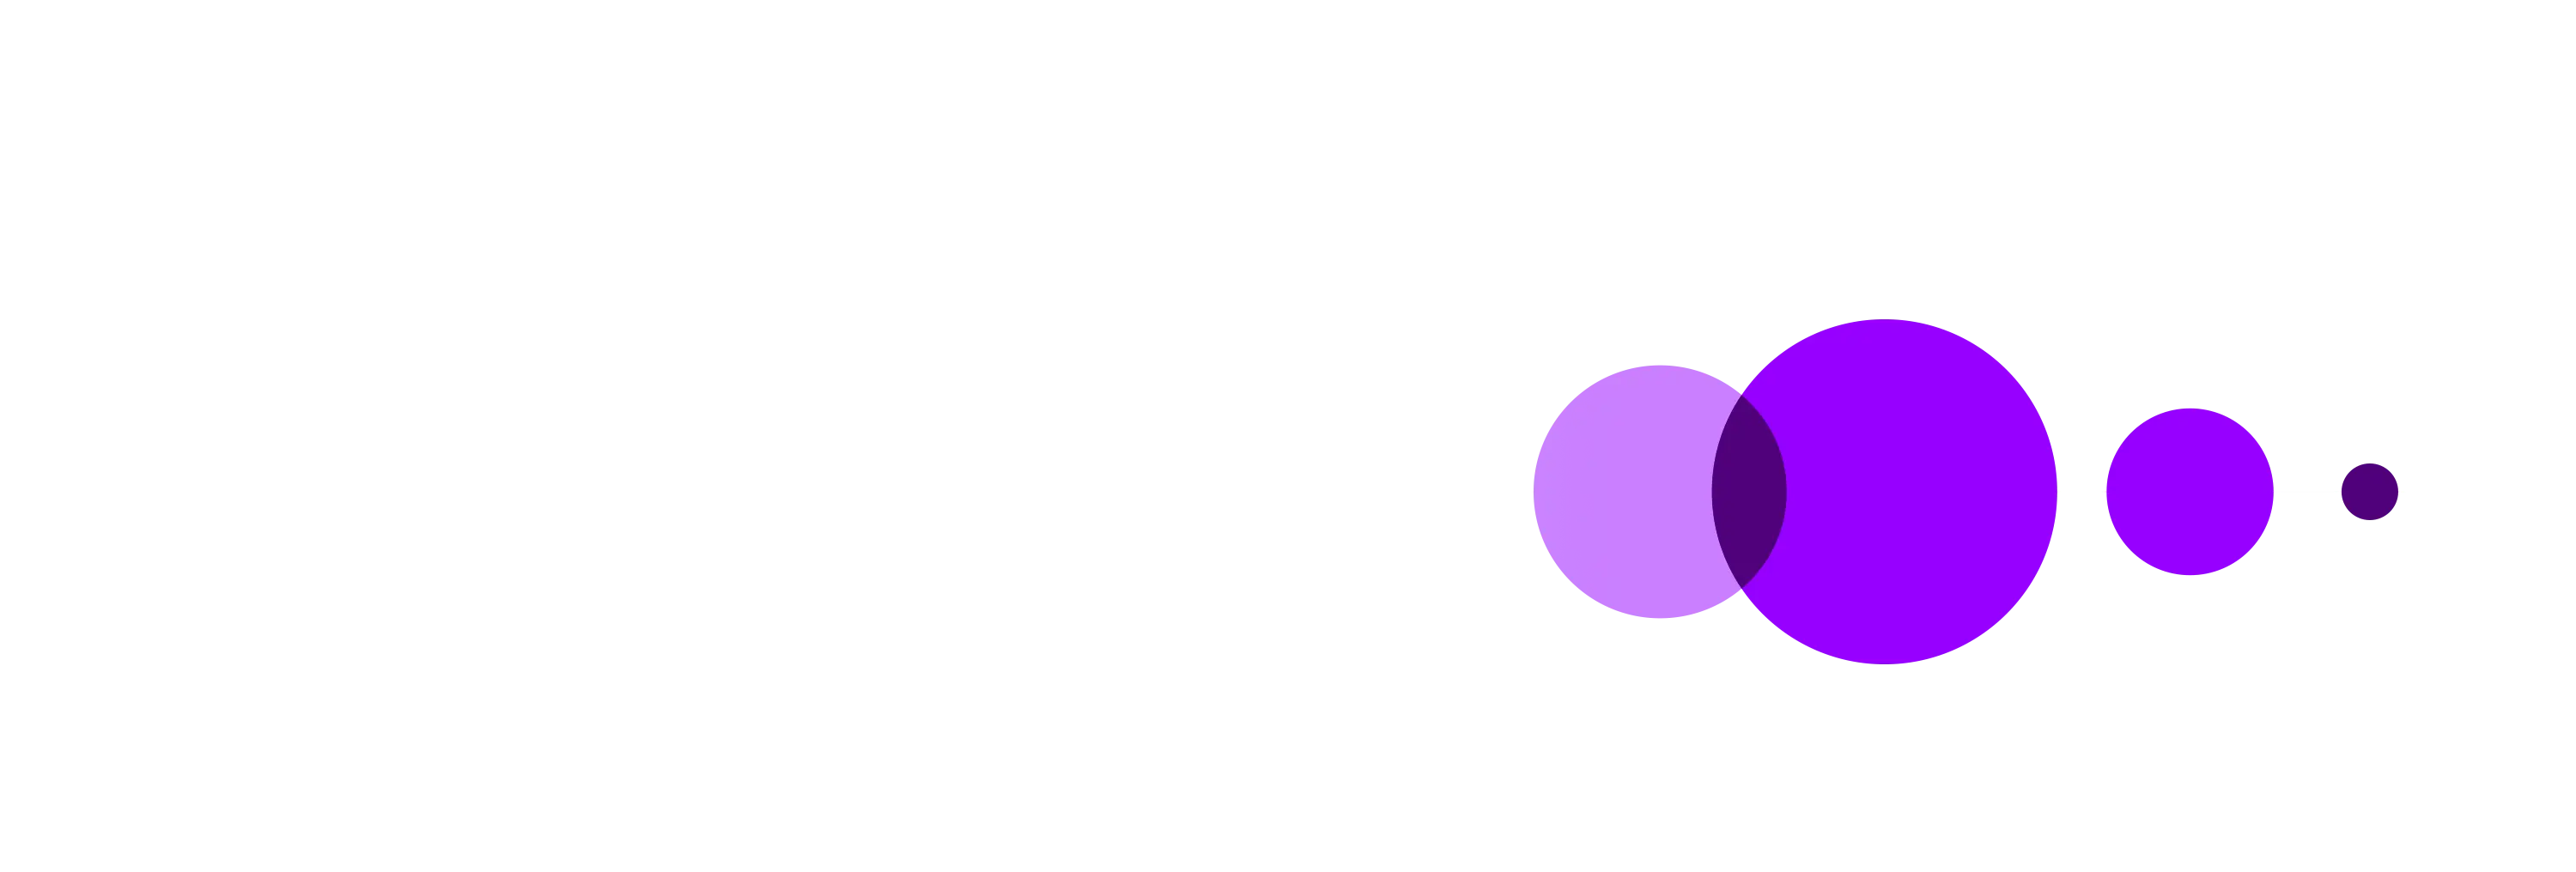 purple circles in a line